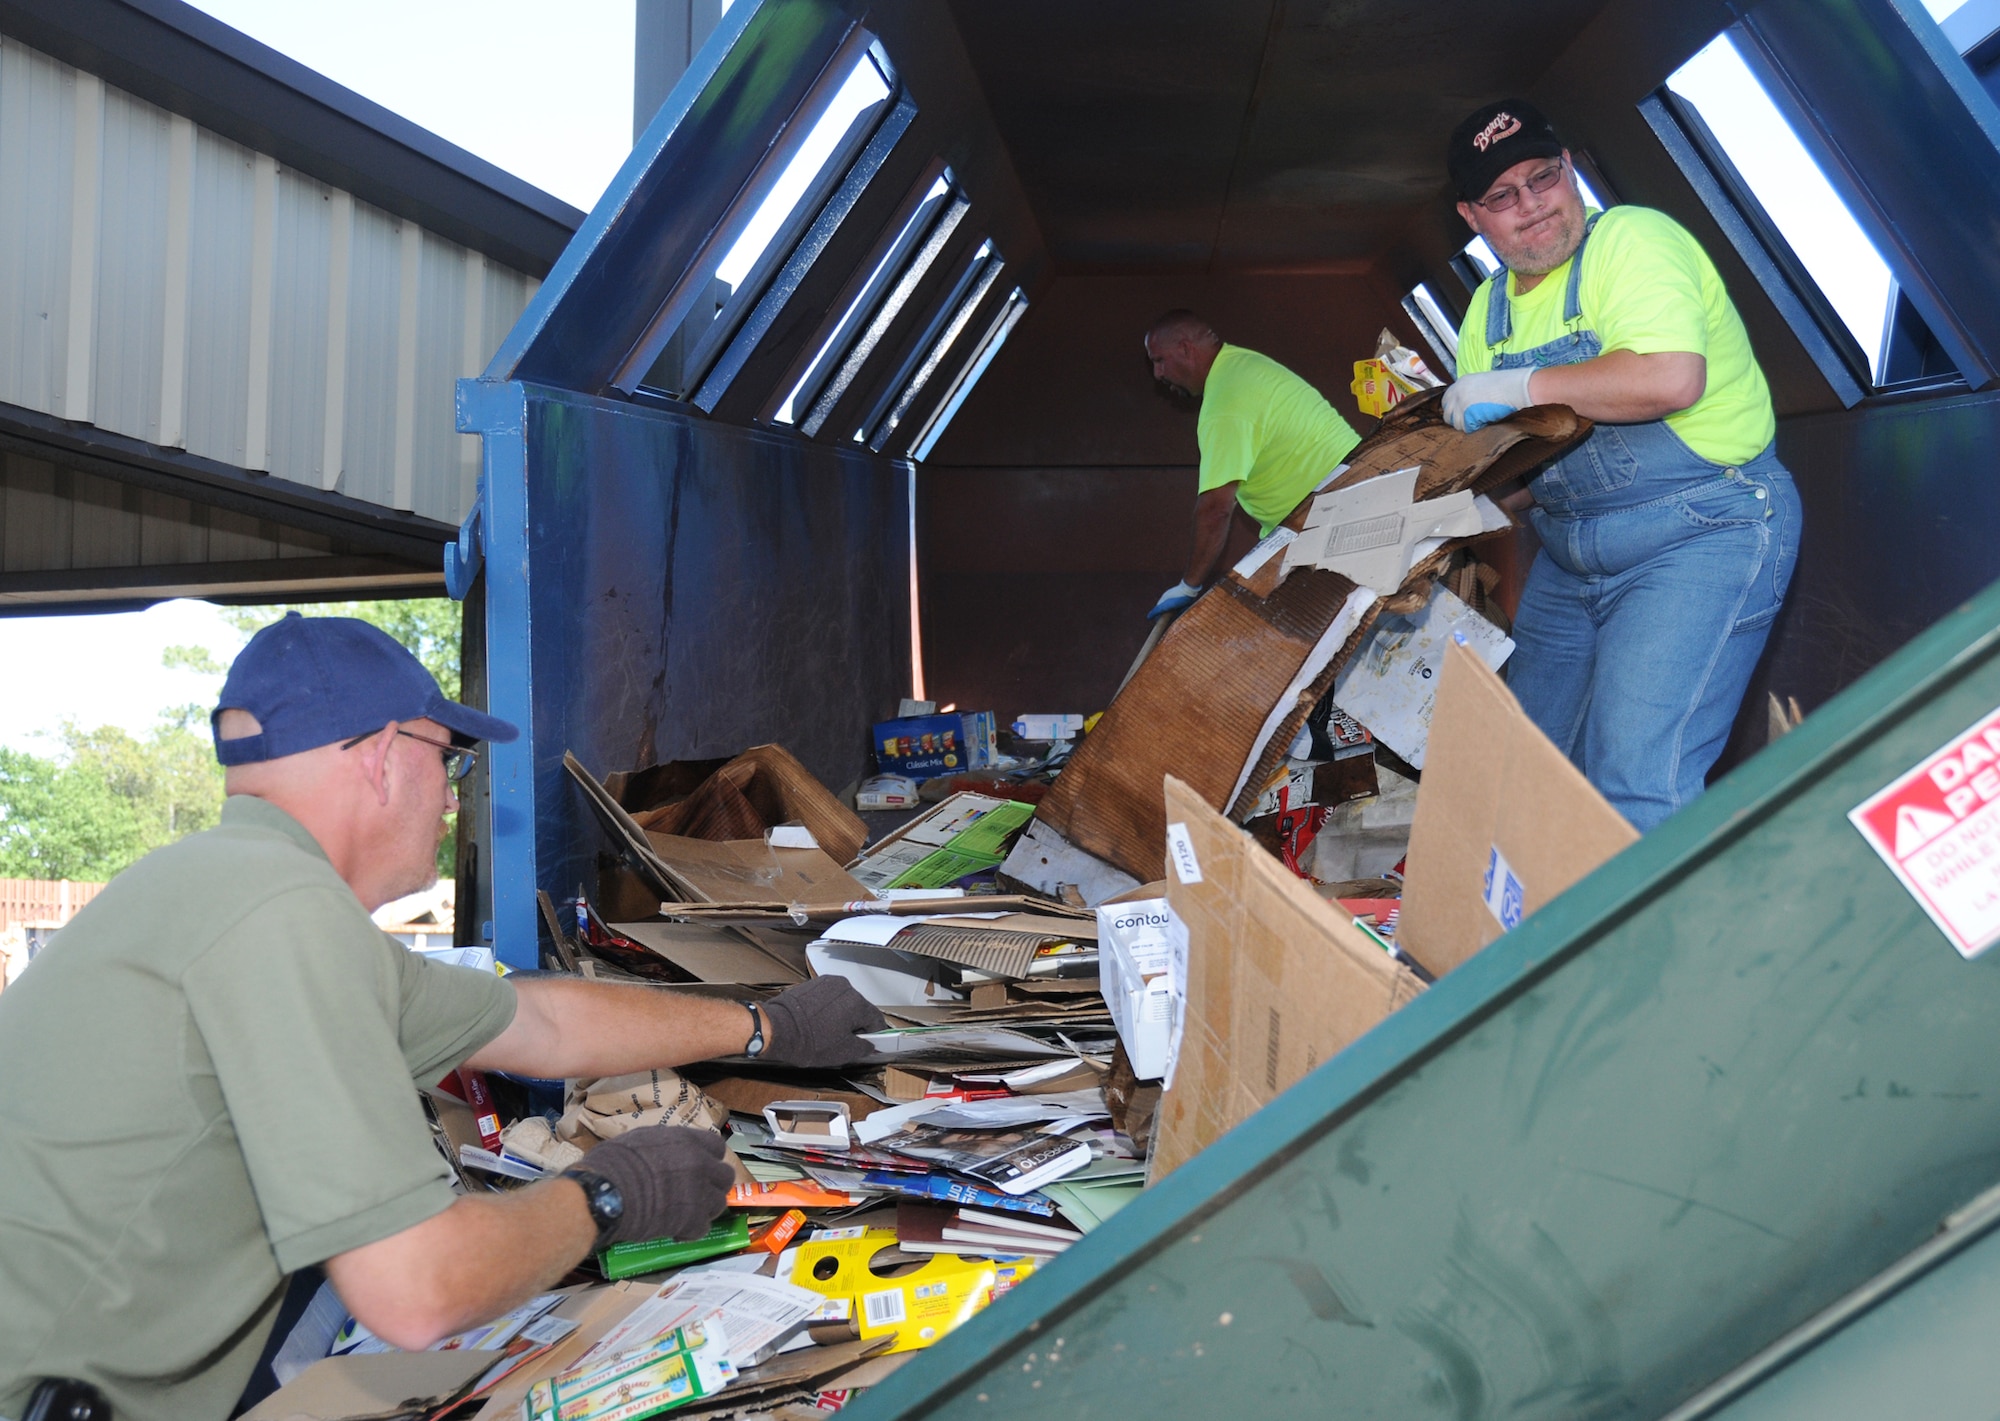 From left, Mr. Robertson, Duane Olson and Douglas Houle work to empty a cardboard recycling bin to prepare the cardboard for binding into bales. Zero Waste Solutions collects a variety of recyclables and sells it to local processing companies.
Proceeds collected from the sale is given back to the government.   (U.S. Air Force photo by Kemberly Groue)